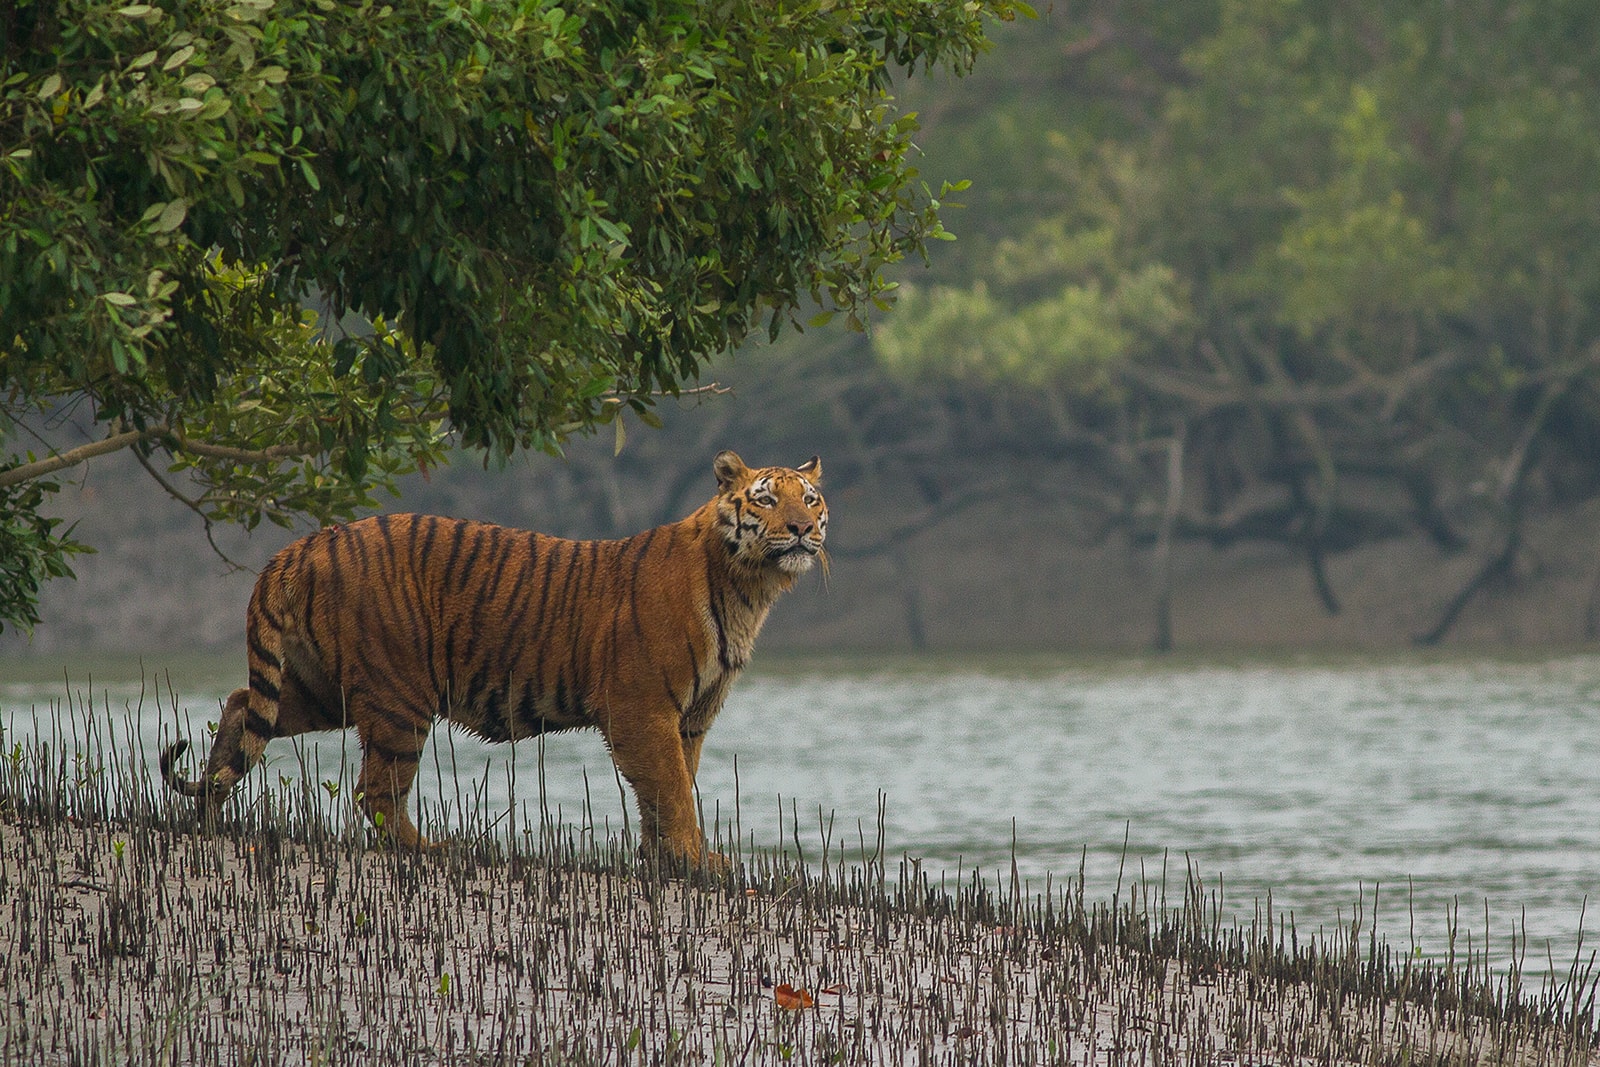 Animals in India, where to observe wild animals?